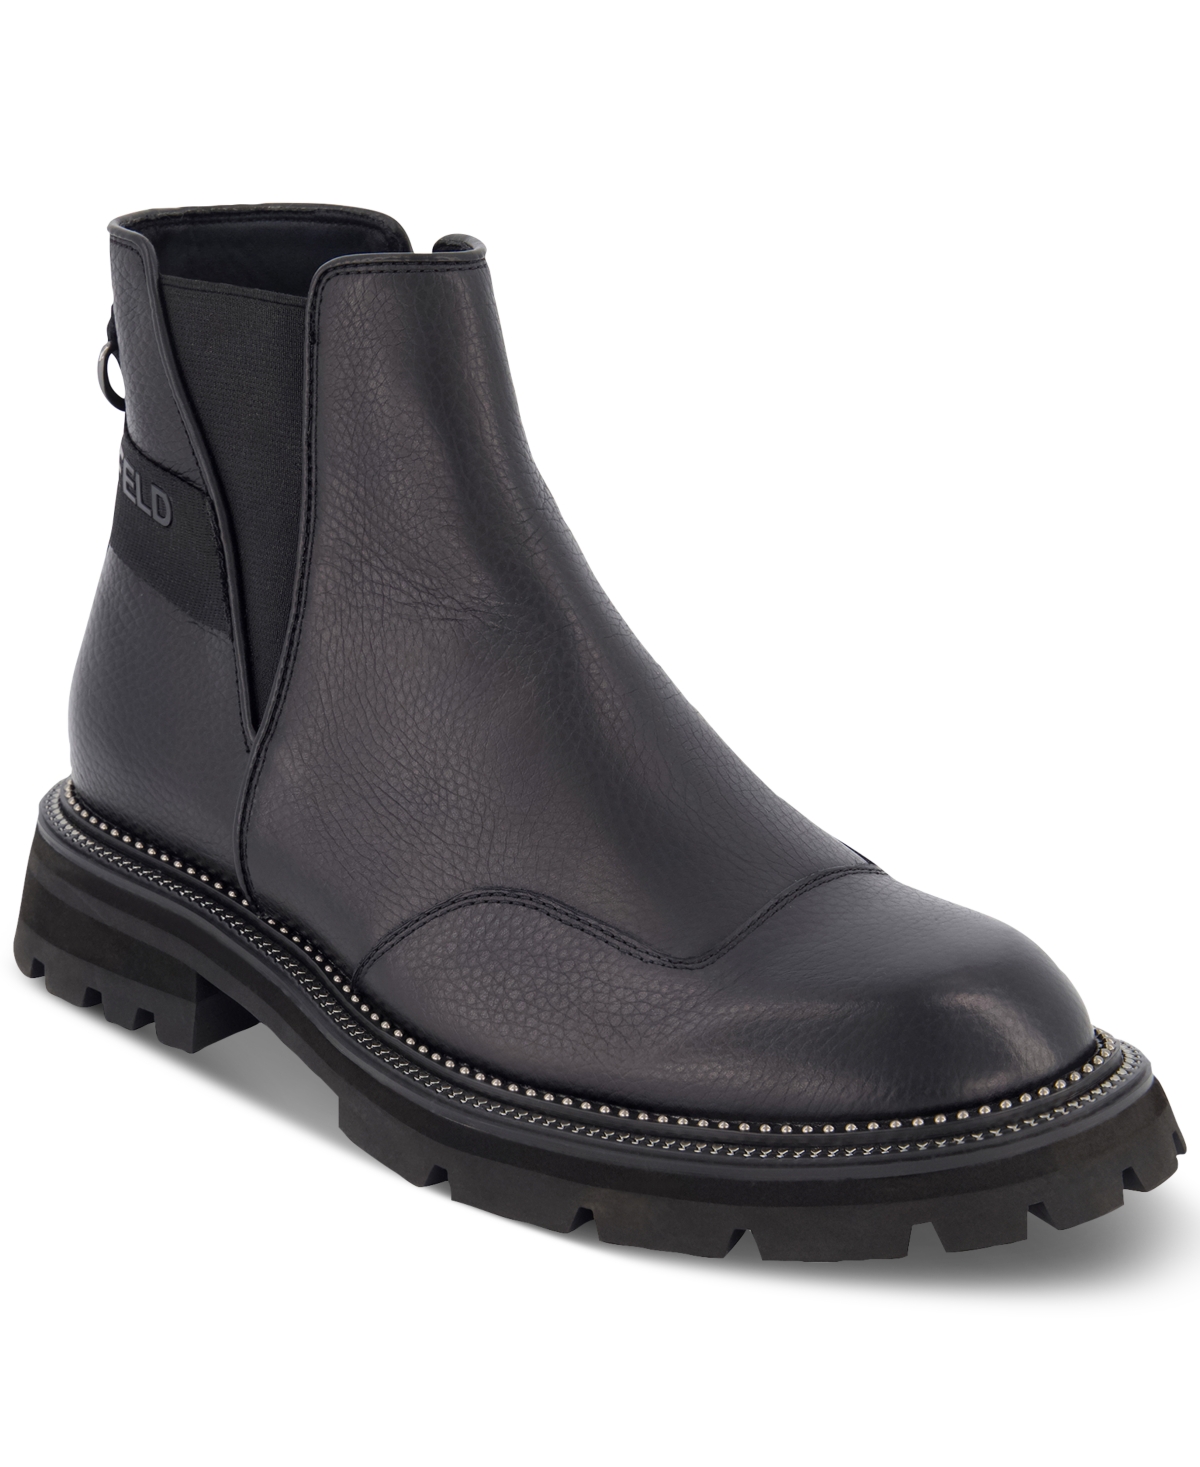 Men's Tumbled Leather Side-Zip Chelsea Boots - Black